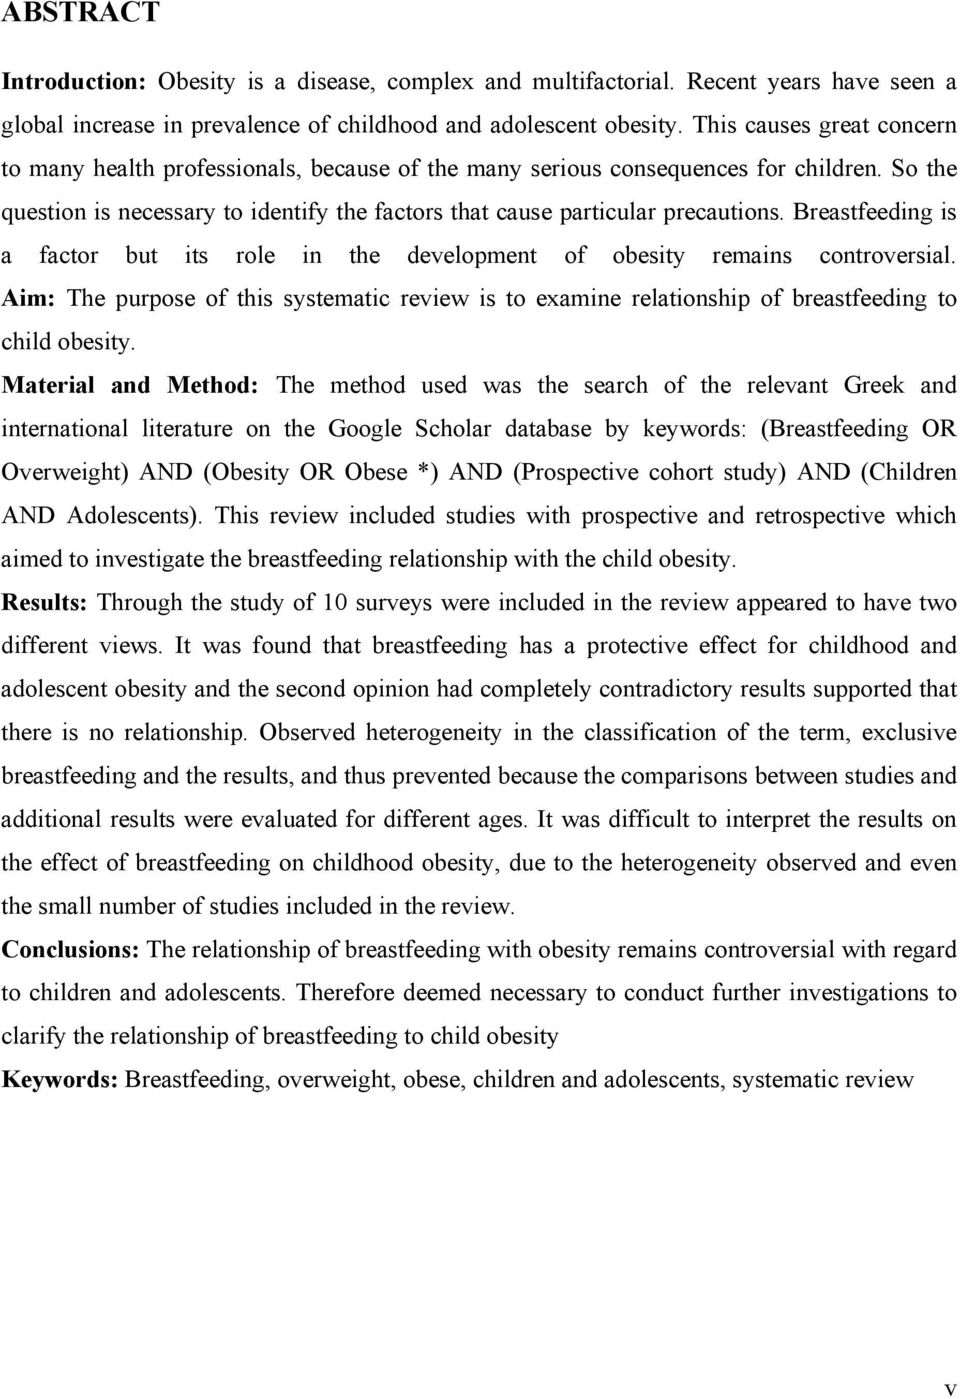 Breastfeeding is a factor but its role in the development of obesity remains controversial. Aim: The purpose of this systematic review is to examine relationship of breastfeeding to child obesity.